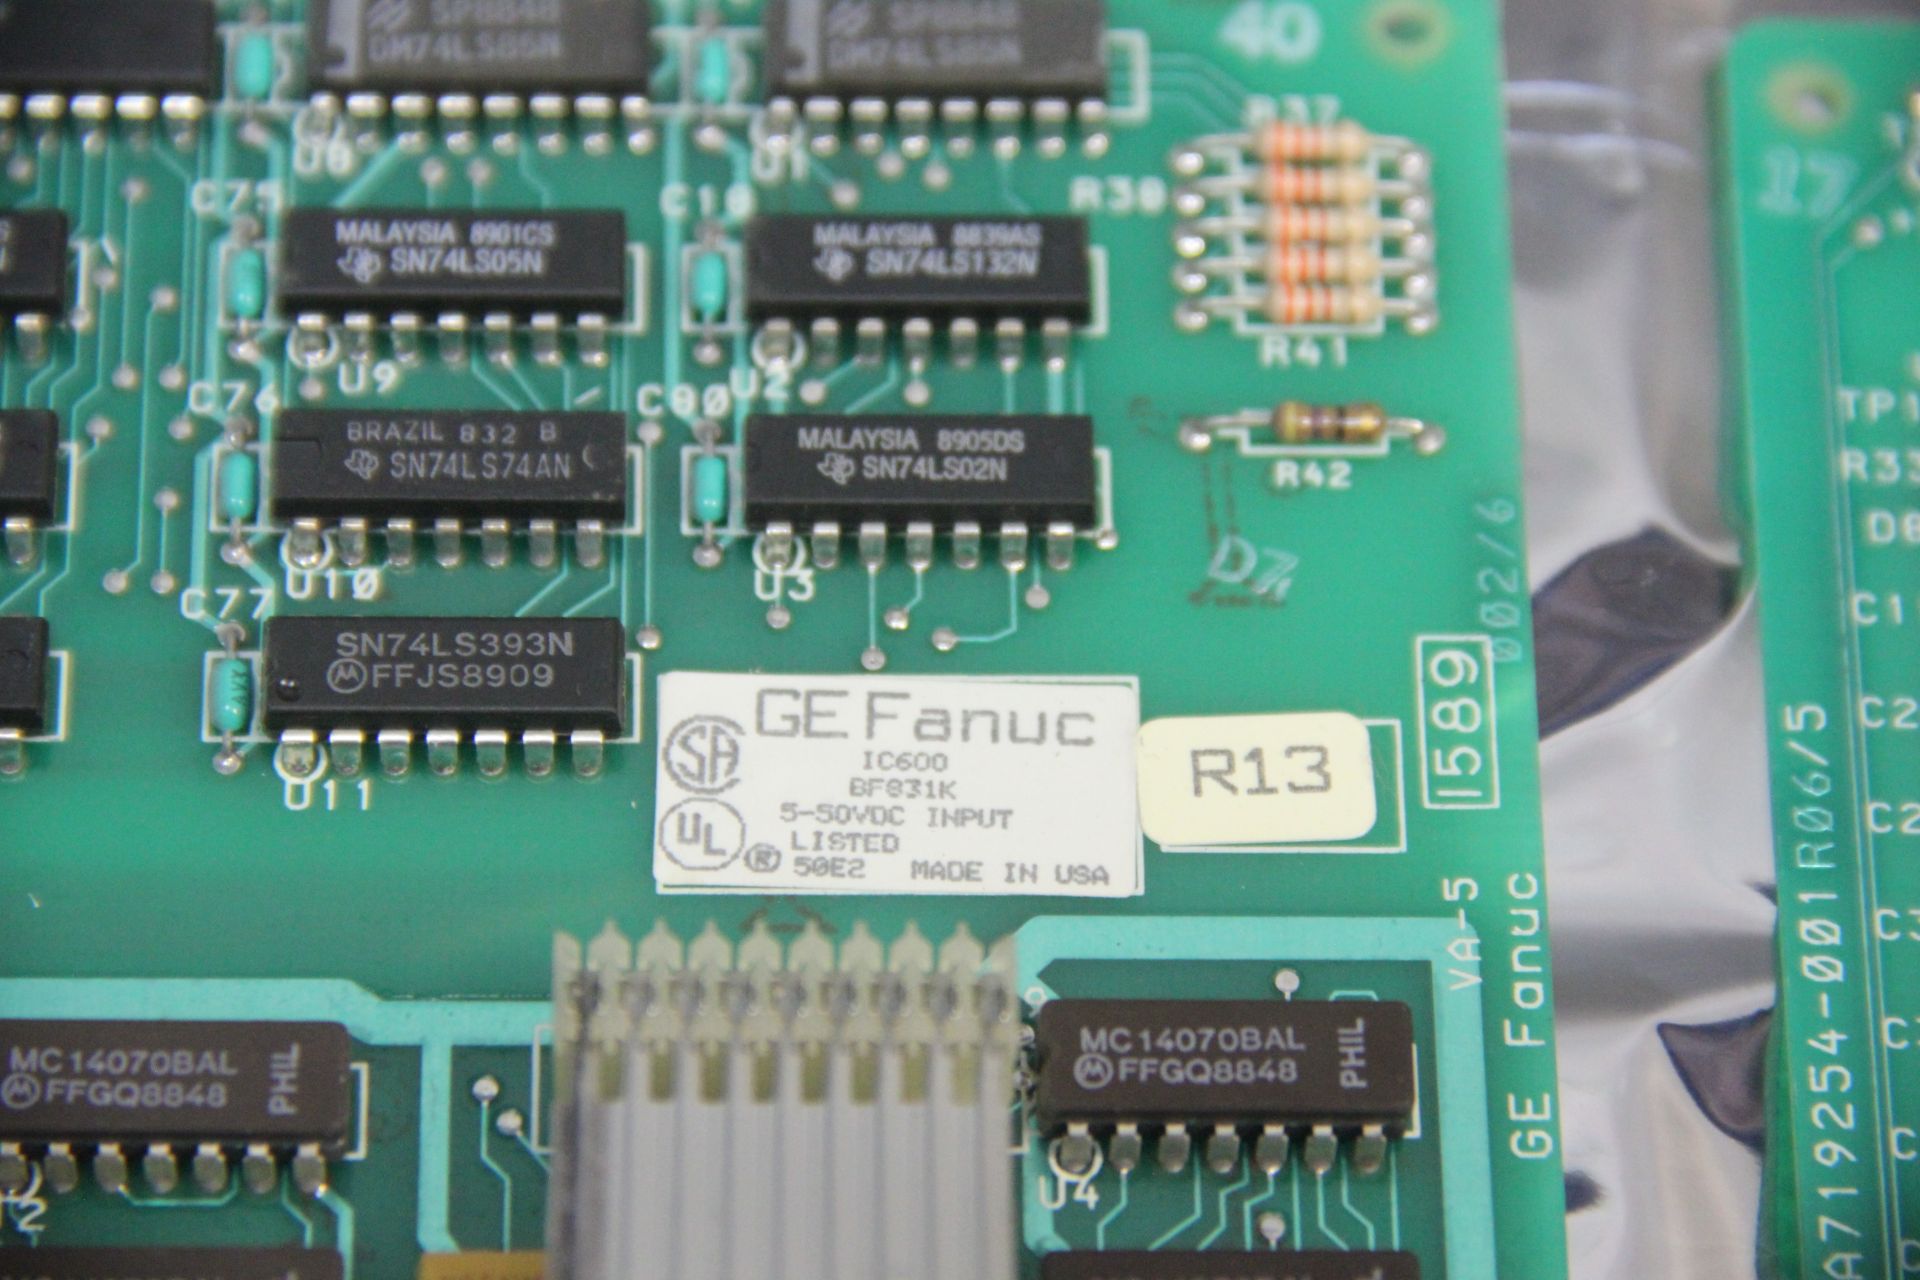 LOT OF 5 GE FANUC PLC BOARDS - Image 5 of 7